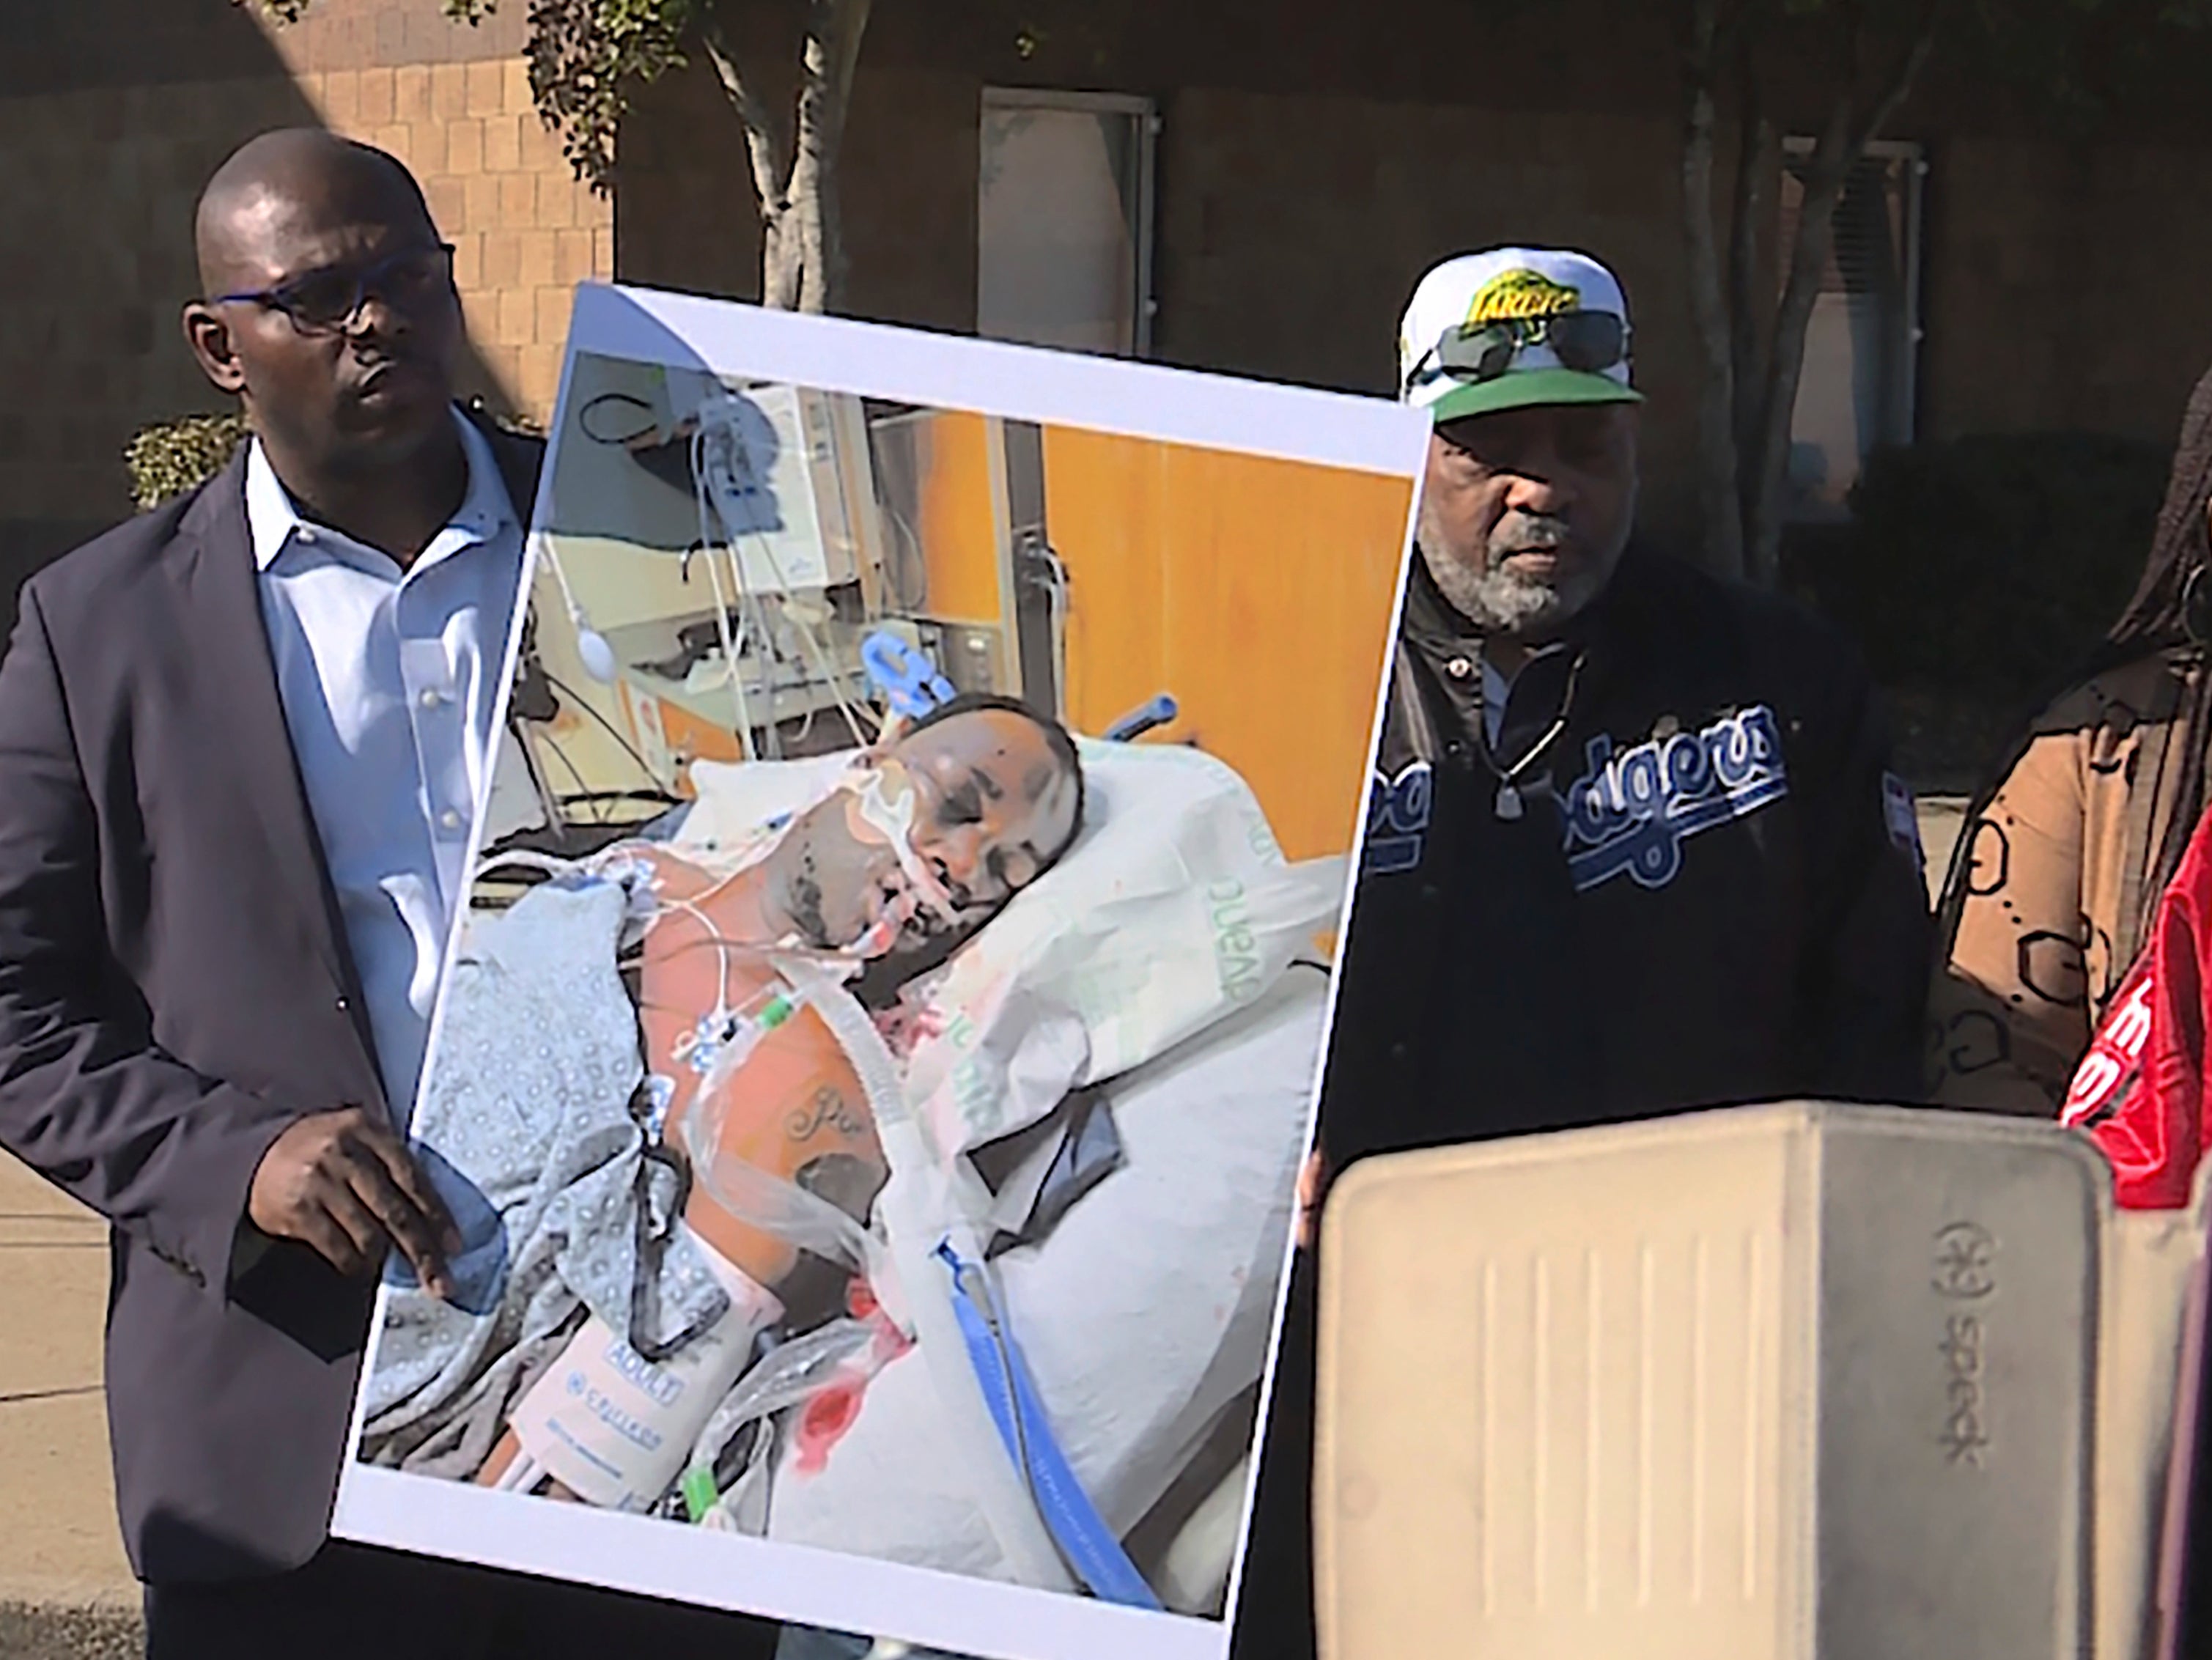 Tyre Nichols' stepfather Rodney Wells, center, stands next to a photo of Nichols in the hospital after his arrest, during a protest in Memphis